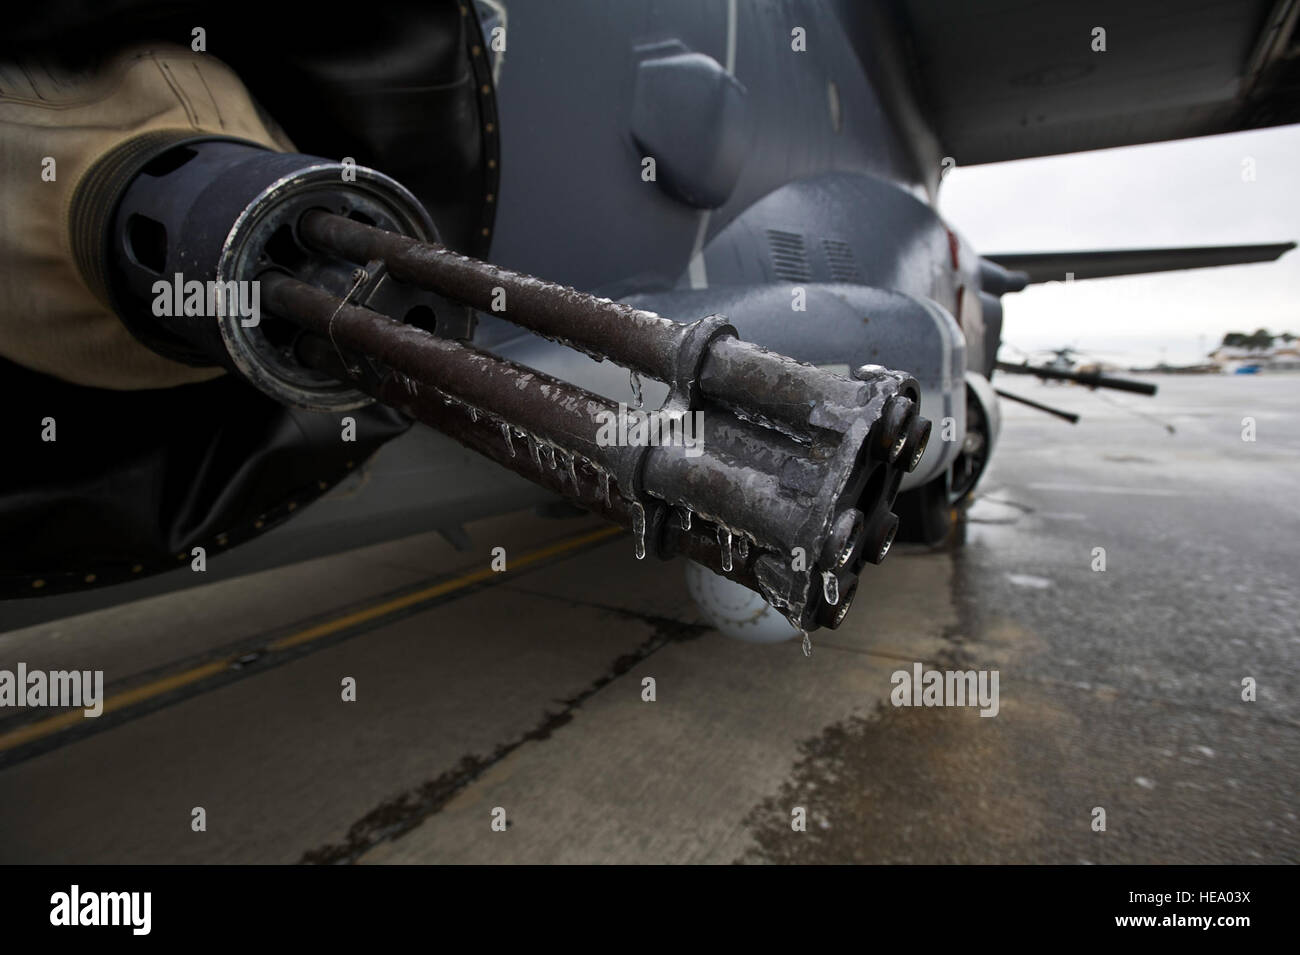 Icicles drip from a 25mm Gatling gun at Hurlburt Field, Fla., Jan. 29, 2014. Freezing rain and cold temperatures layered the entire area in a thin sheet of ice, making roads unsafe and closing military bases.(U.S. Air Force Photo/ Staff Sgt. John Bainter) Stock Photo